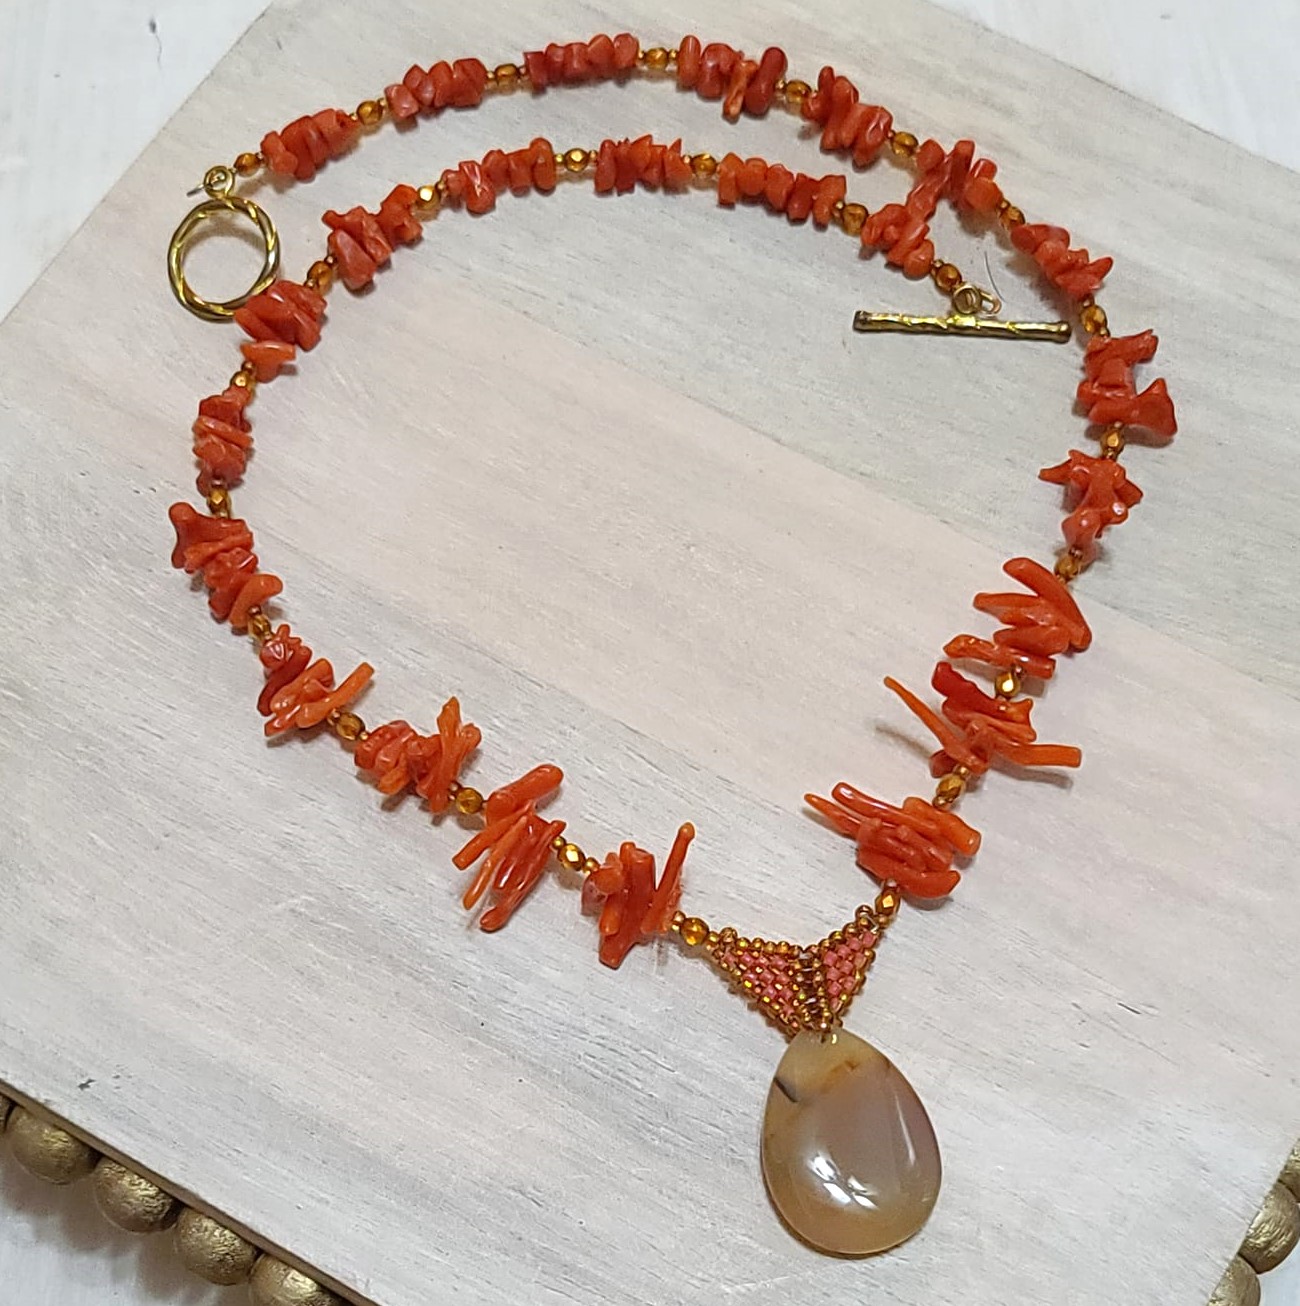 Handcrafted Spine Red Coral with Drop Stone Pendant Lariat